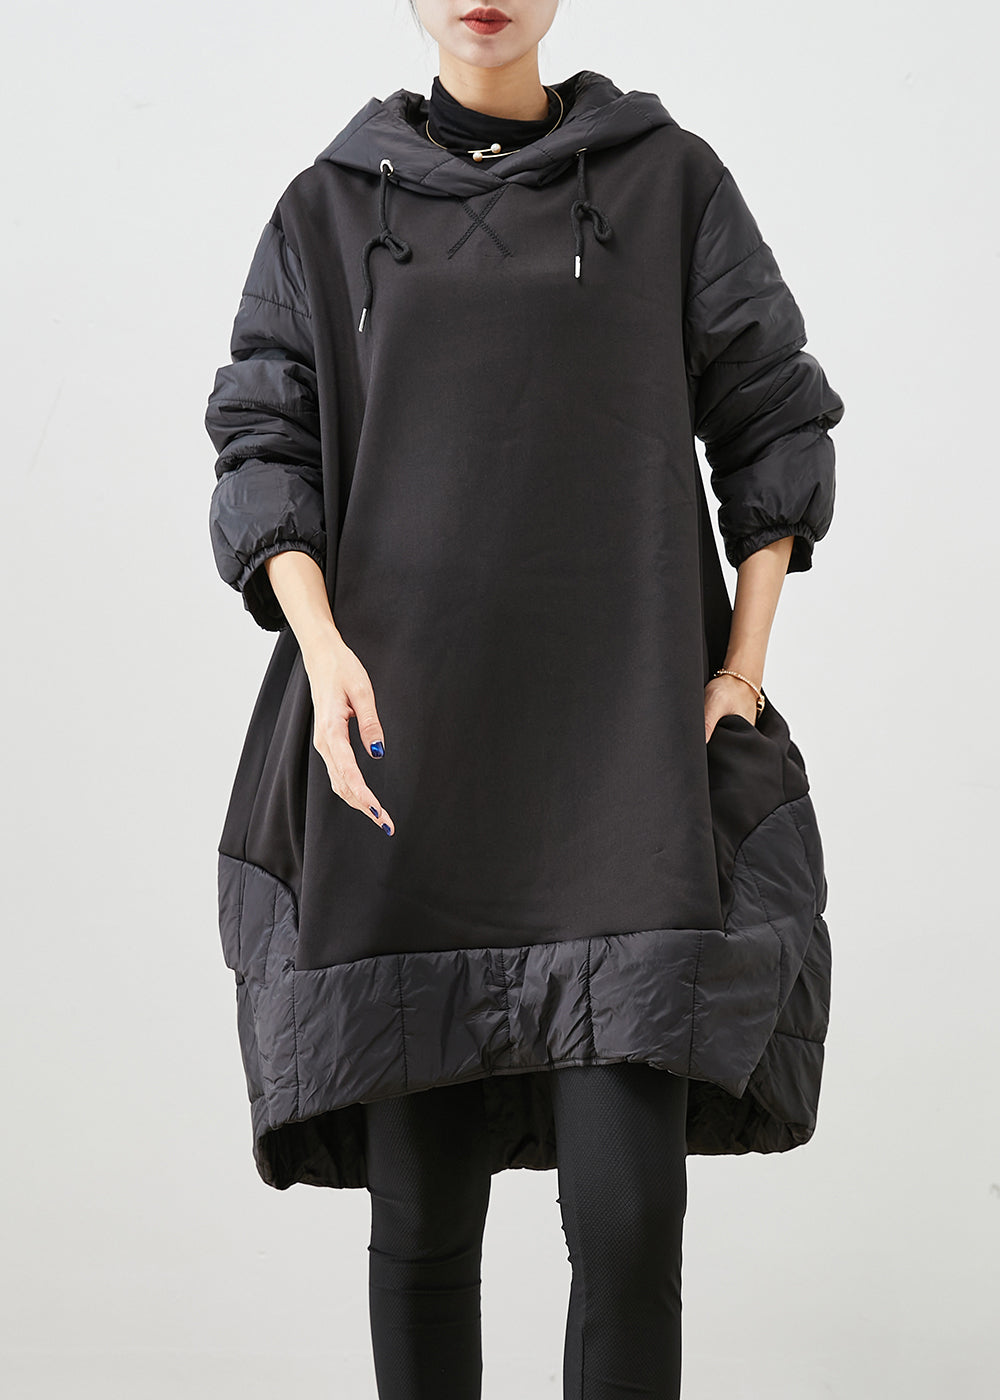 Women Black Hooded Patchwork Thick Cotton Pullover Sweatshirt Dress Fall